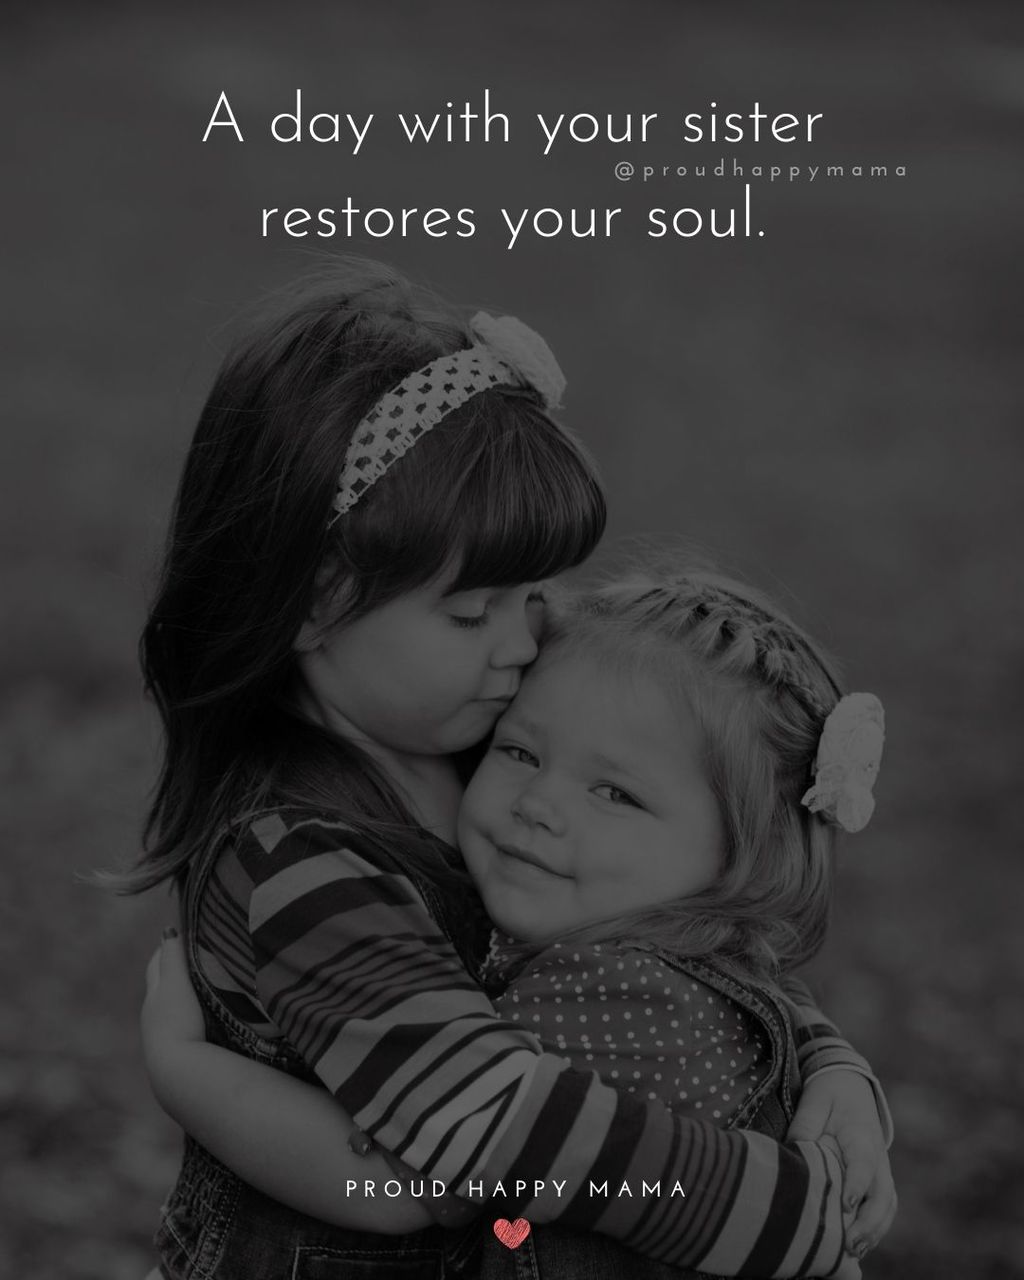 Meaningful Sister Quotes - A day with your sister restores your soul.